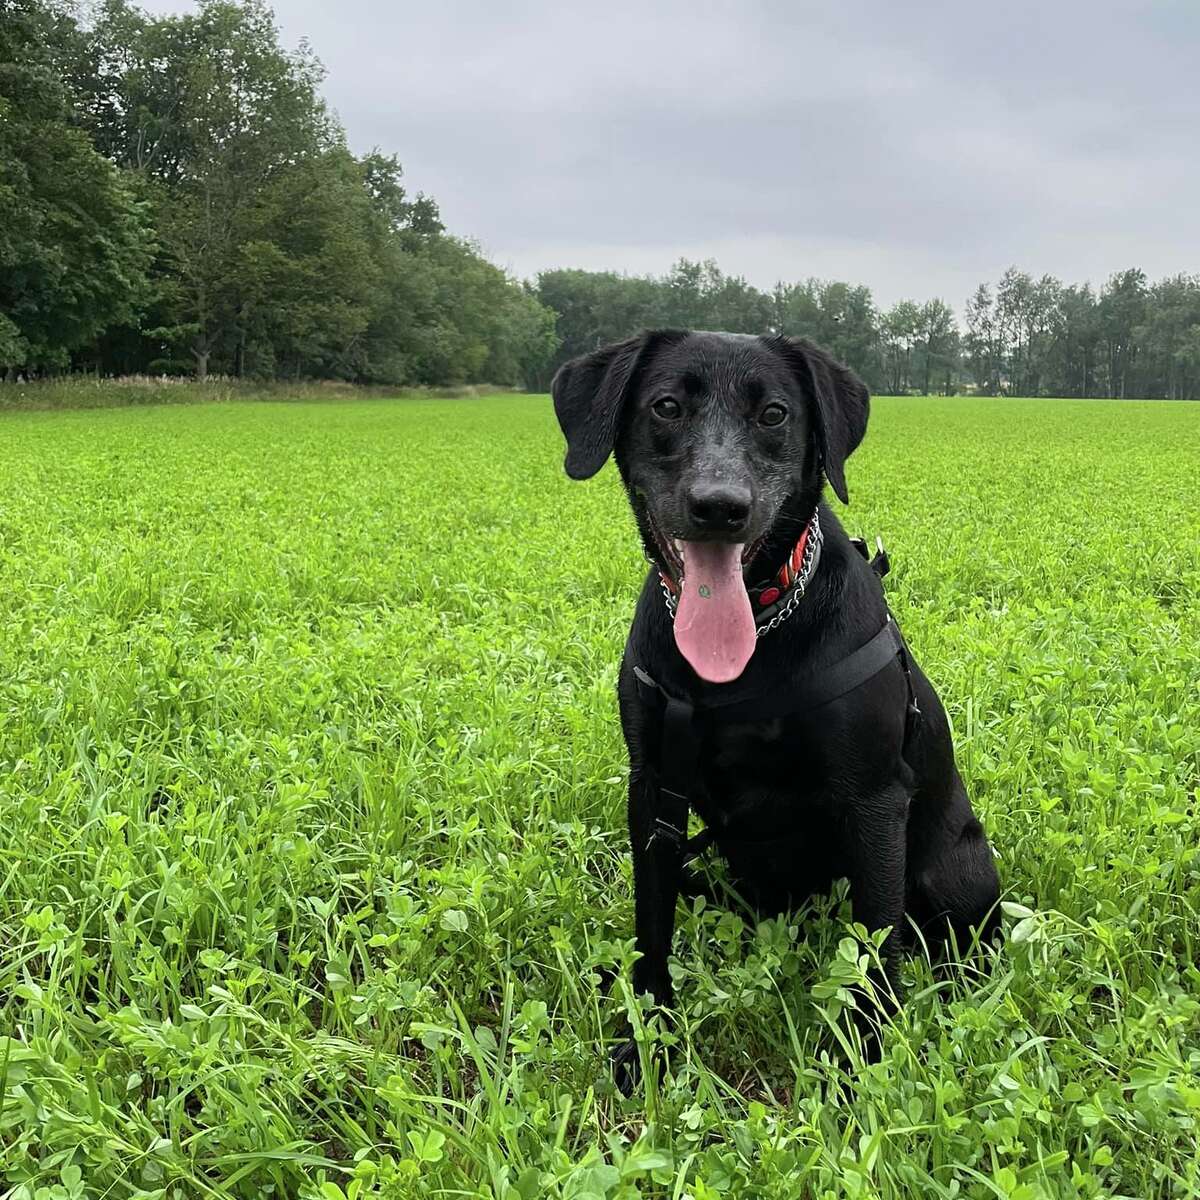 Caleb Evans' dog, Ruger, a one-year-old black Labrador retriever, was the perfect choice for their family and as a tracker to help Evans hunt. 